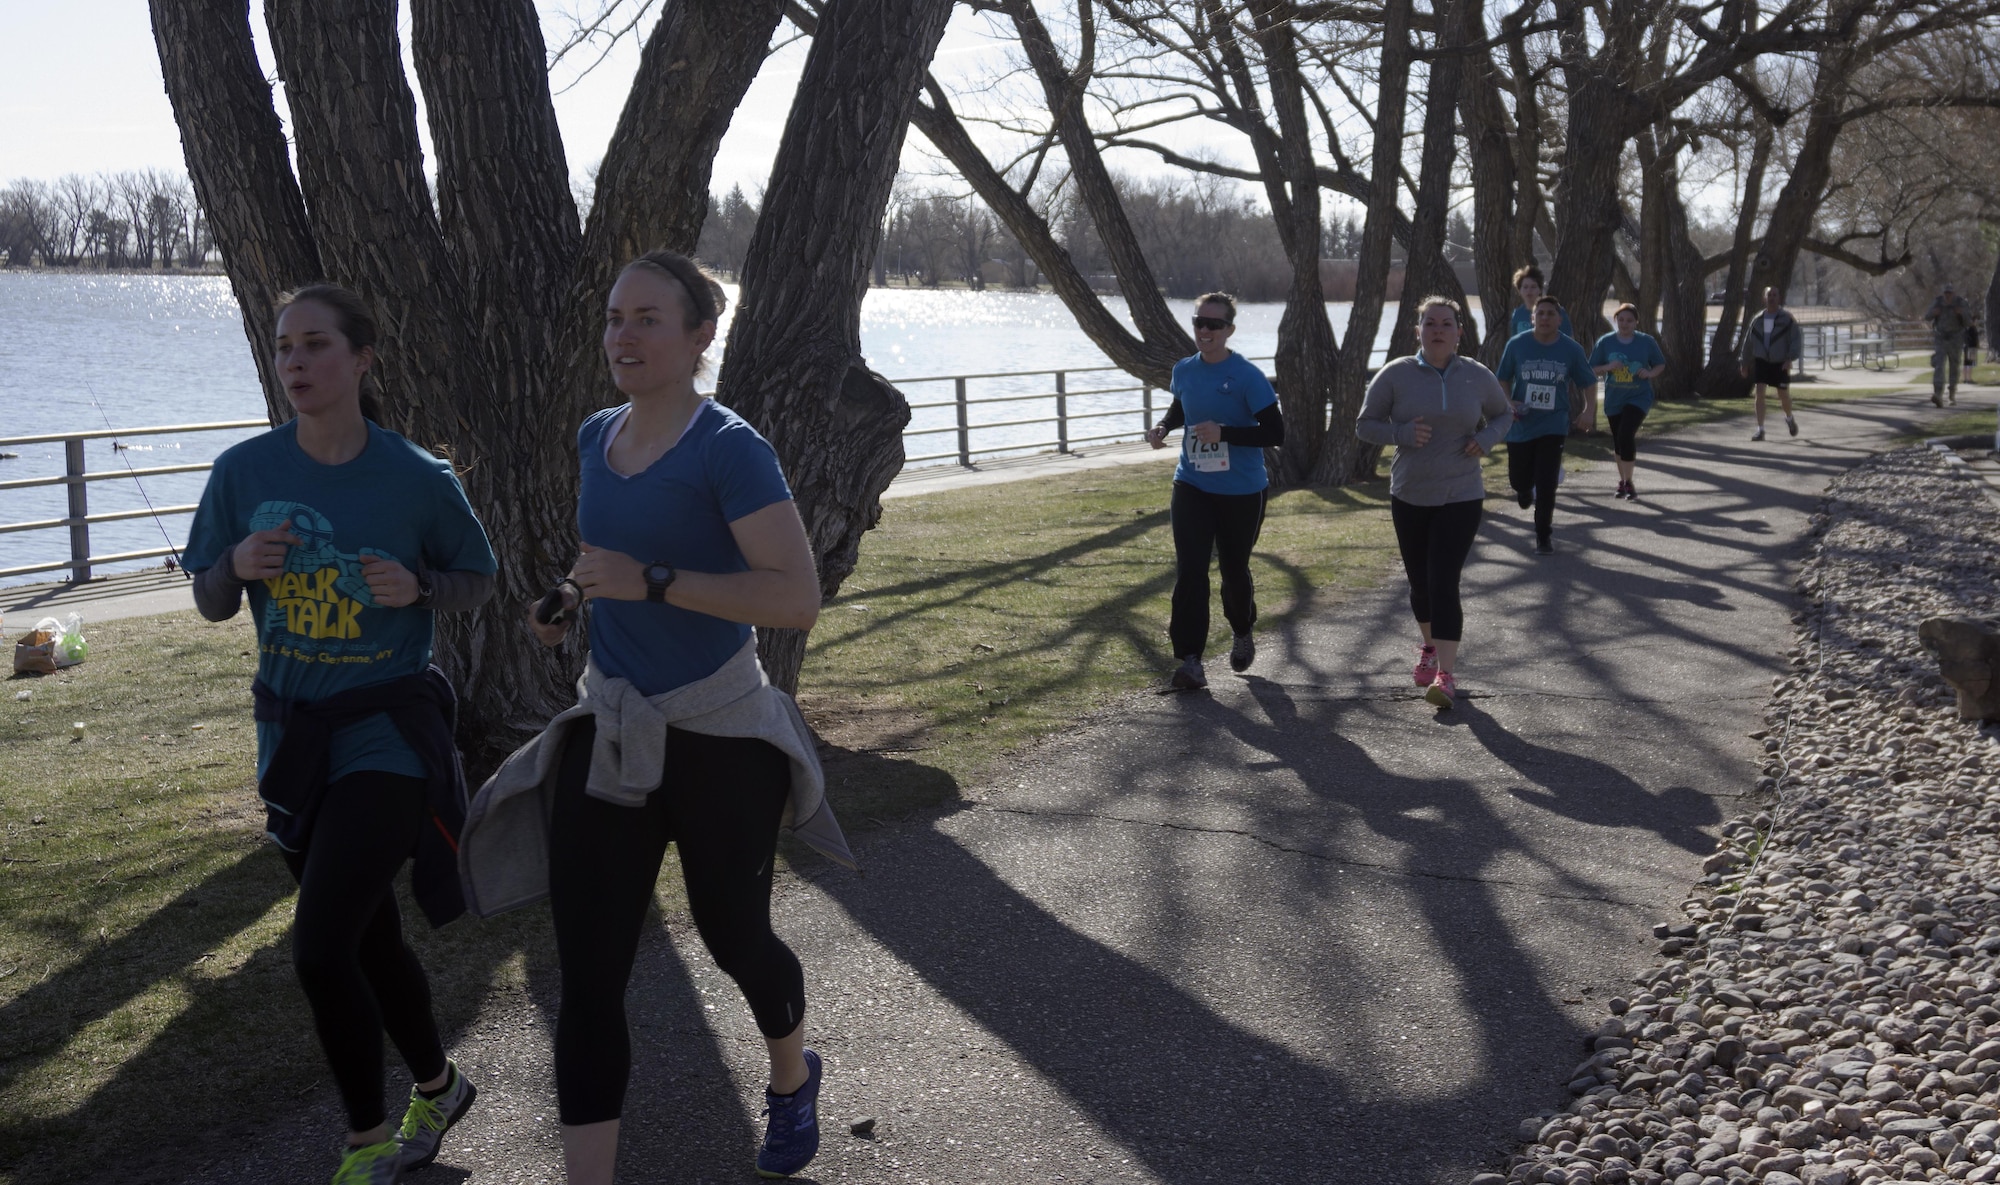 Runners follow the course around Sloan’s Lake in Lion’s Park, Cheyenne, Wyo., during the Sexual Assault Awareness 5- kilometer race April 9, 2016. More than 500 participants – Airmen, Soldiers, Guardsmen and community members – ran, walked and ruck-marched the course. (U.S. Air Force photo by Senior Airman Brandon Valle)